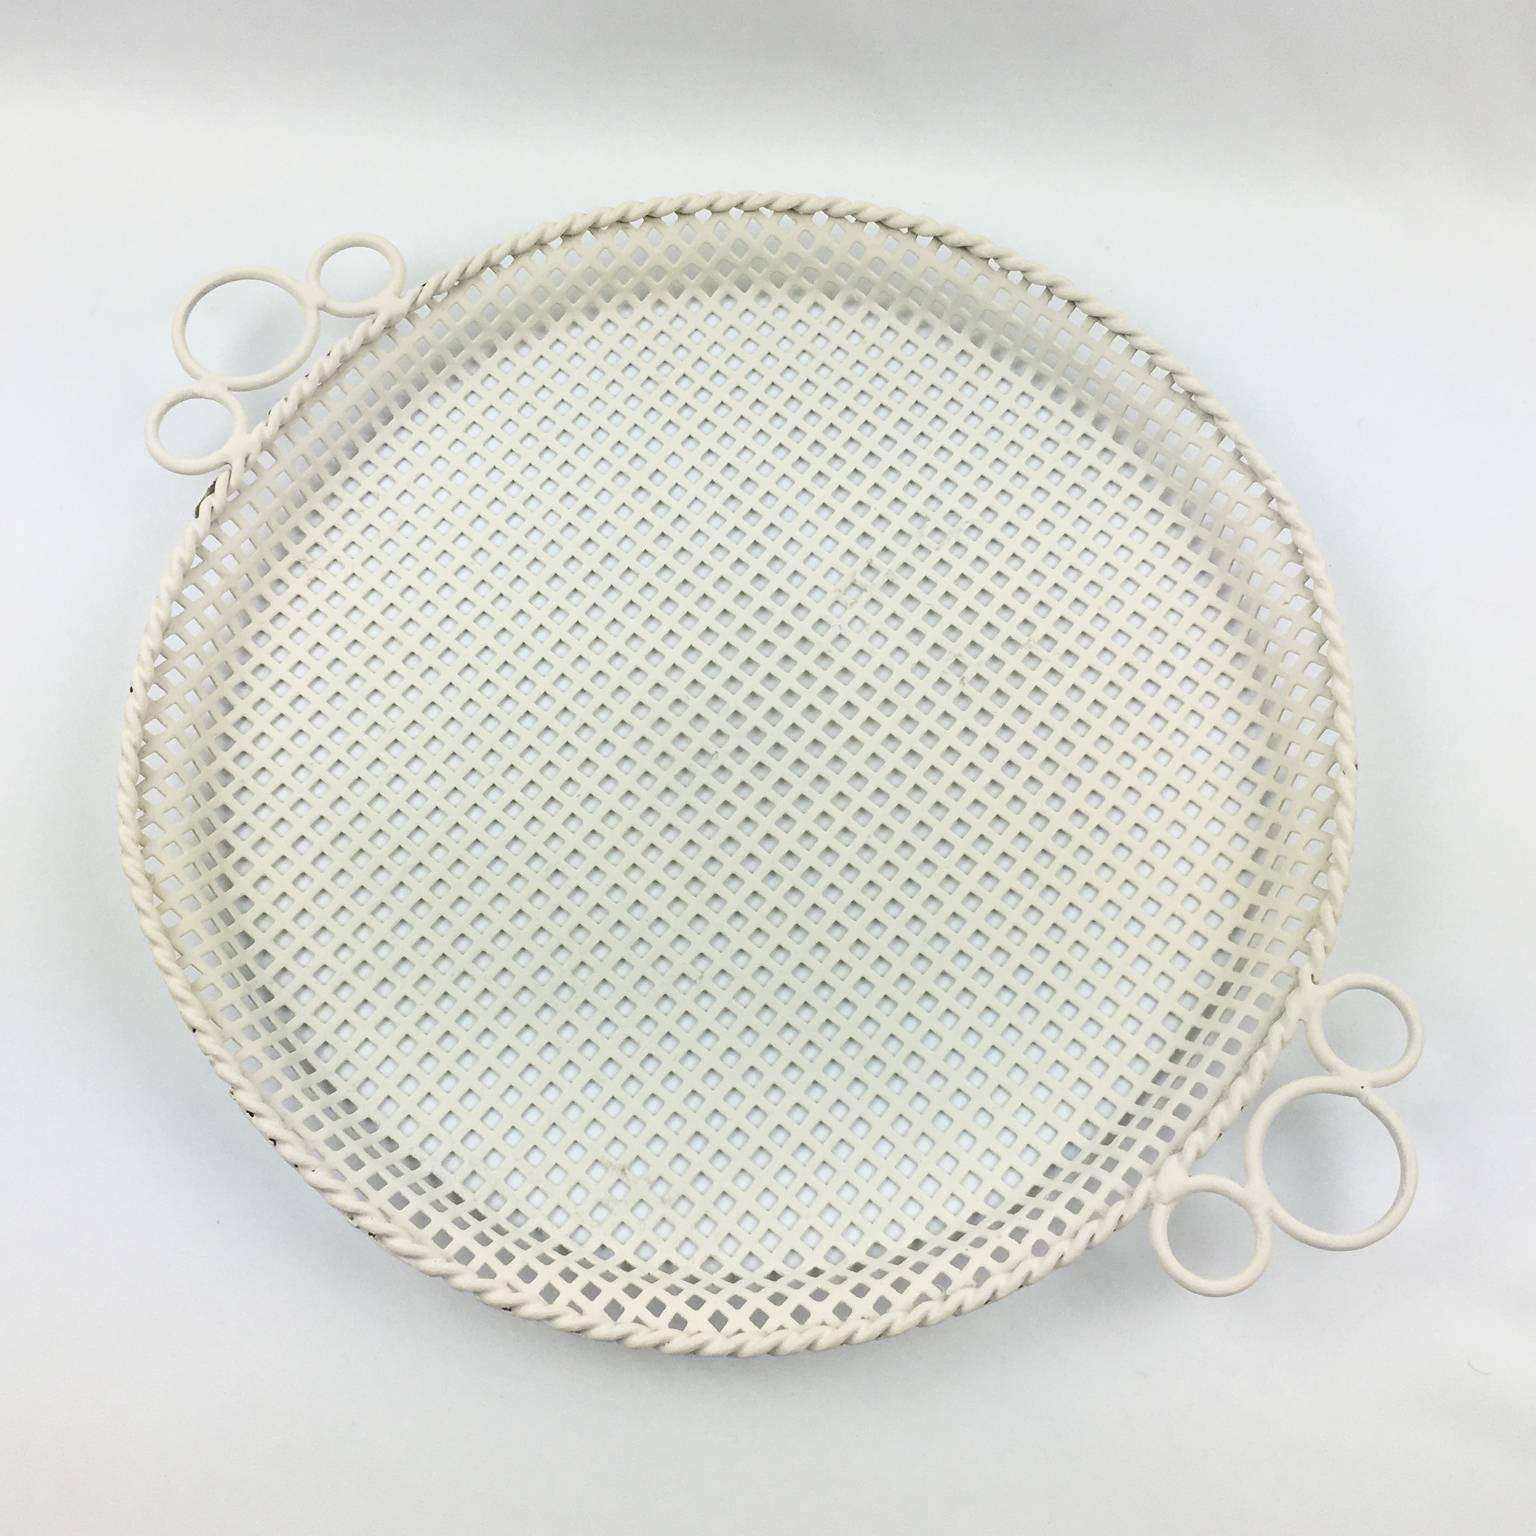 Mid-20th Century Mathieu Mategot Style Perforated Metal Barware Serving Tray